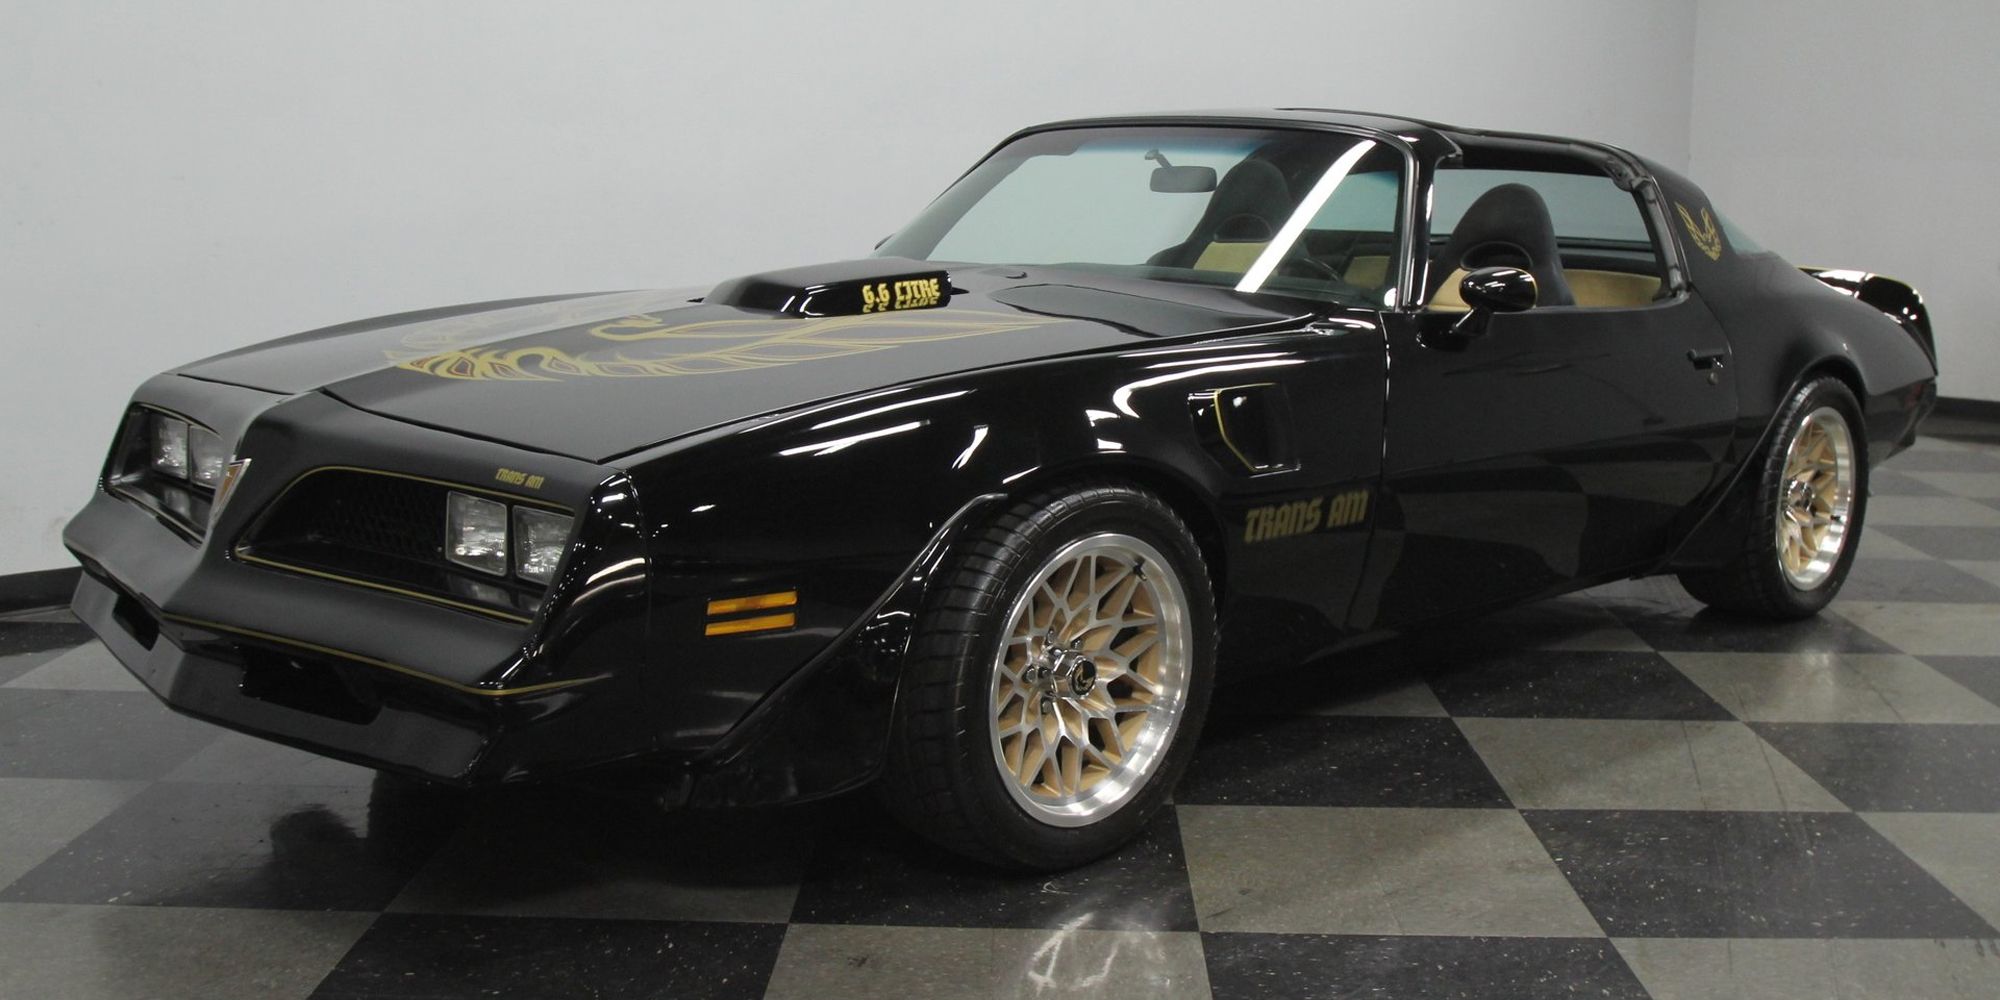 The front of the '77 Transam